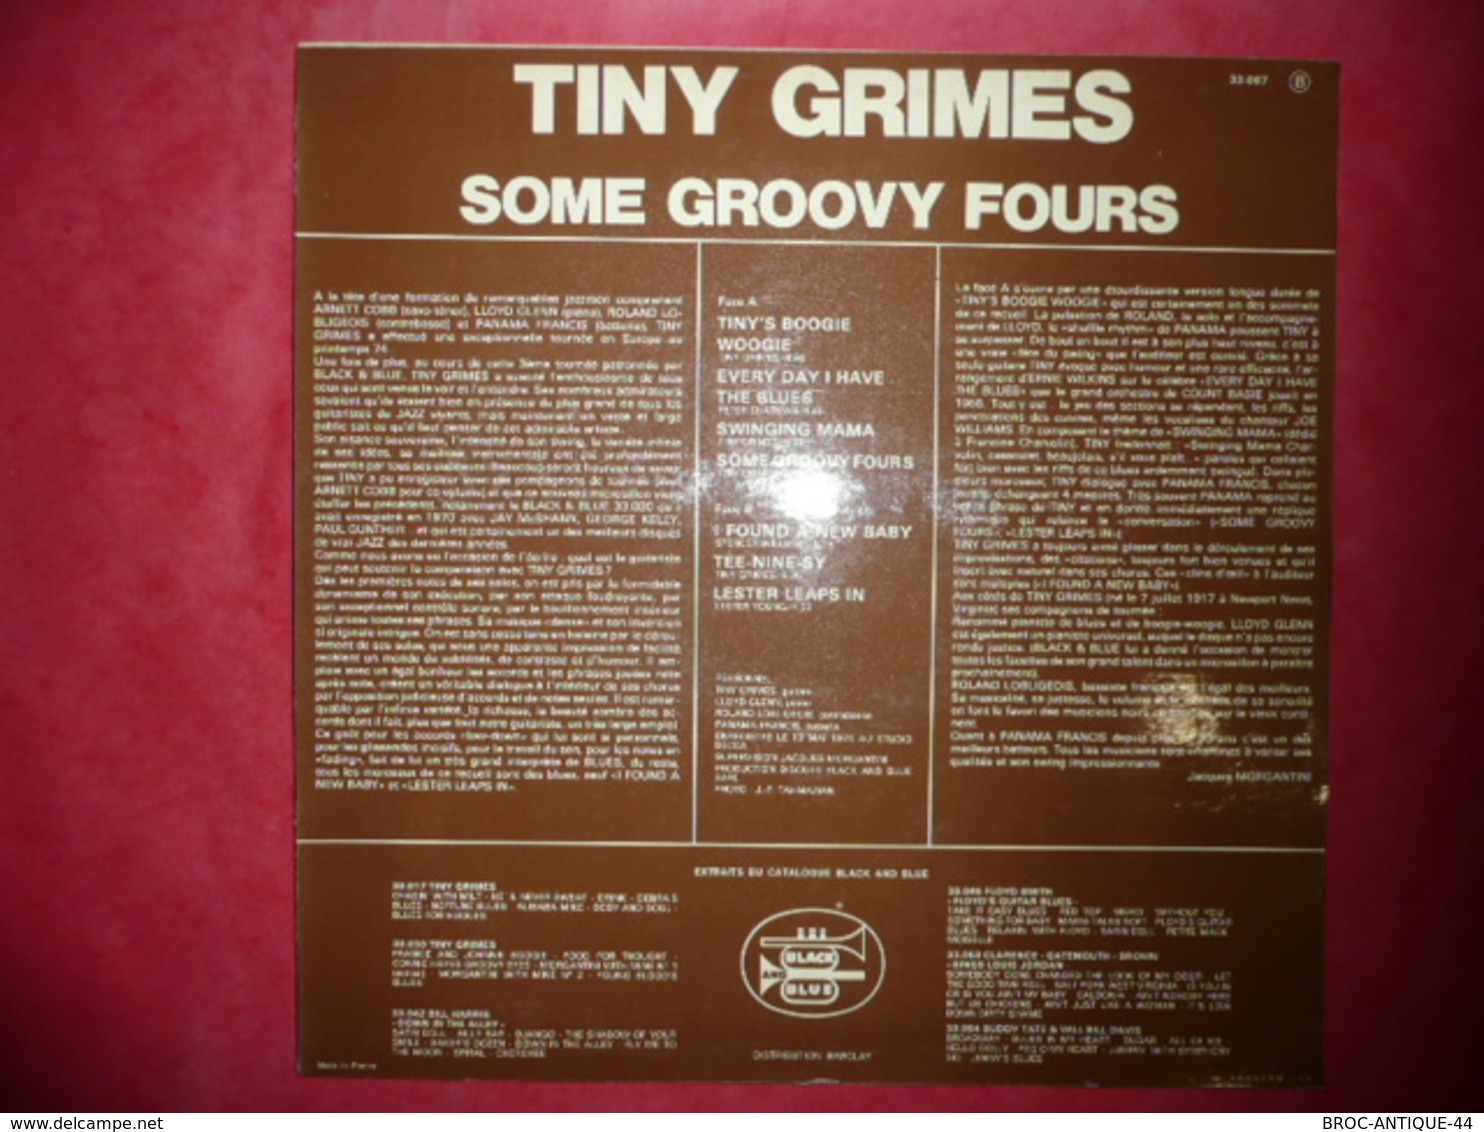 LP N°3156 - TINY GRIMES - SOME GROOVY FOURS - 33067 - POCHETTE DIFFERENTE - Jazz